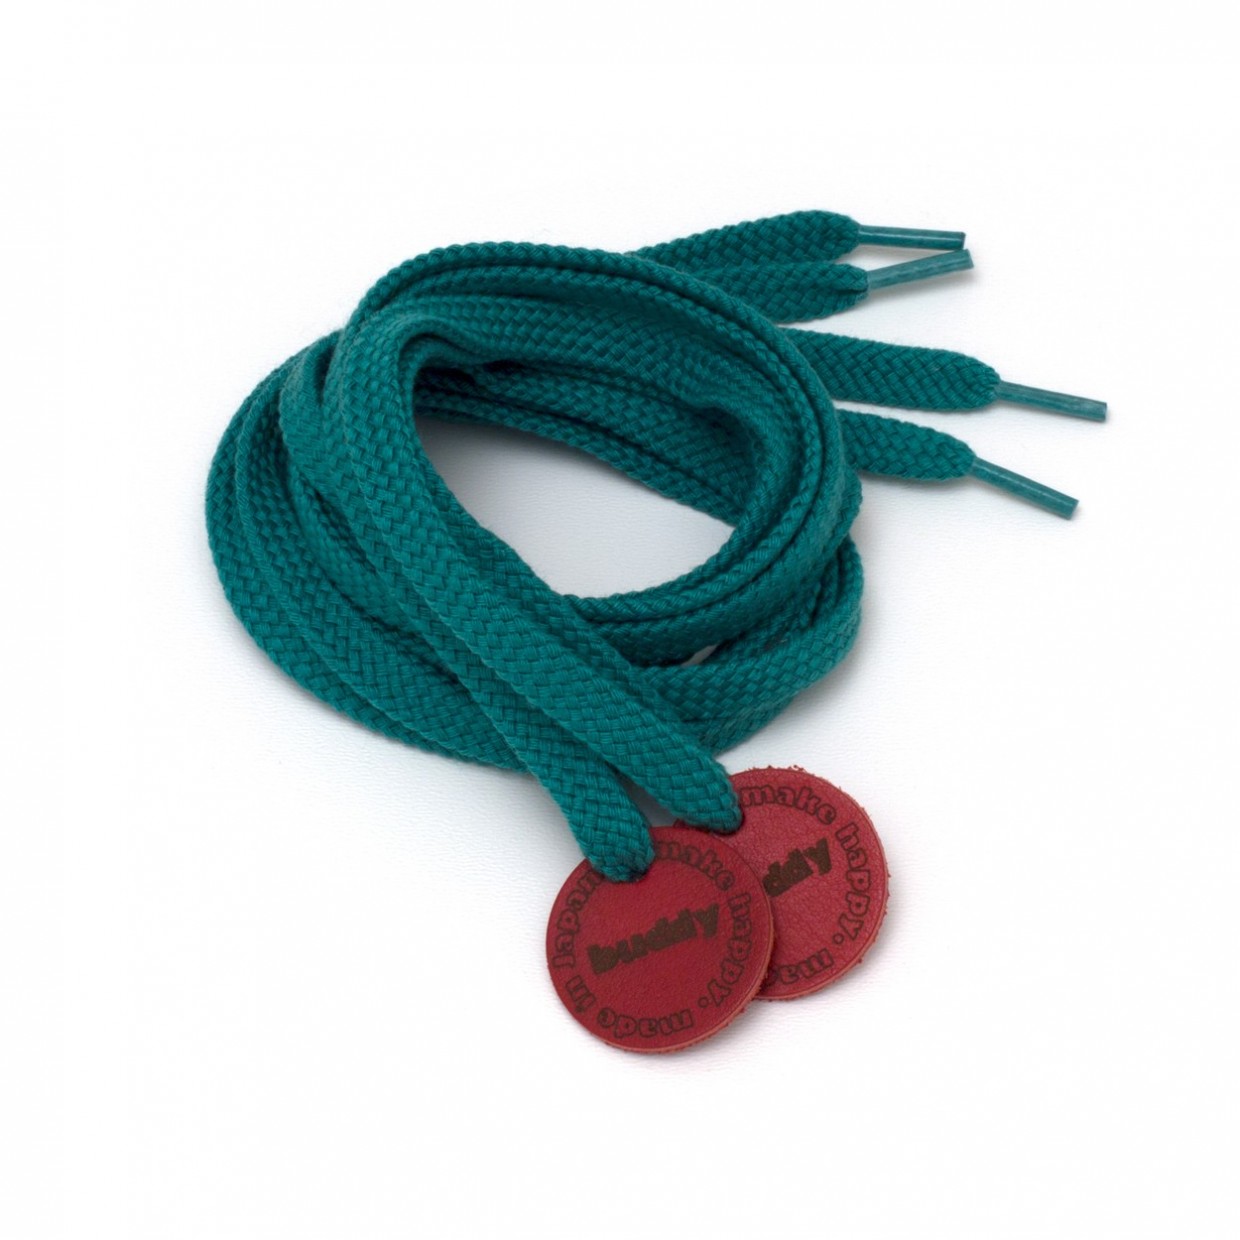 Shoelaces Green with Leather patch 130 cm : 51"